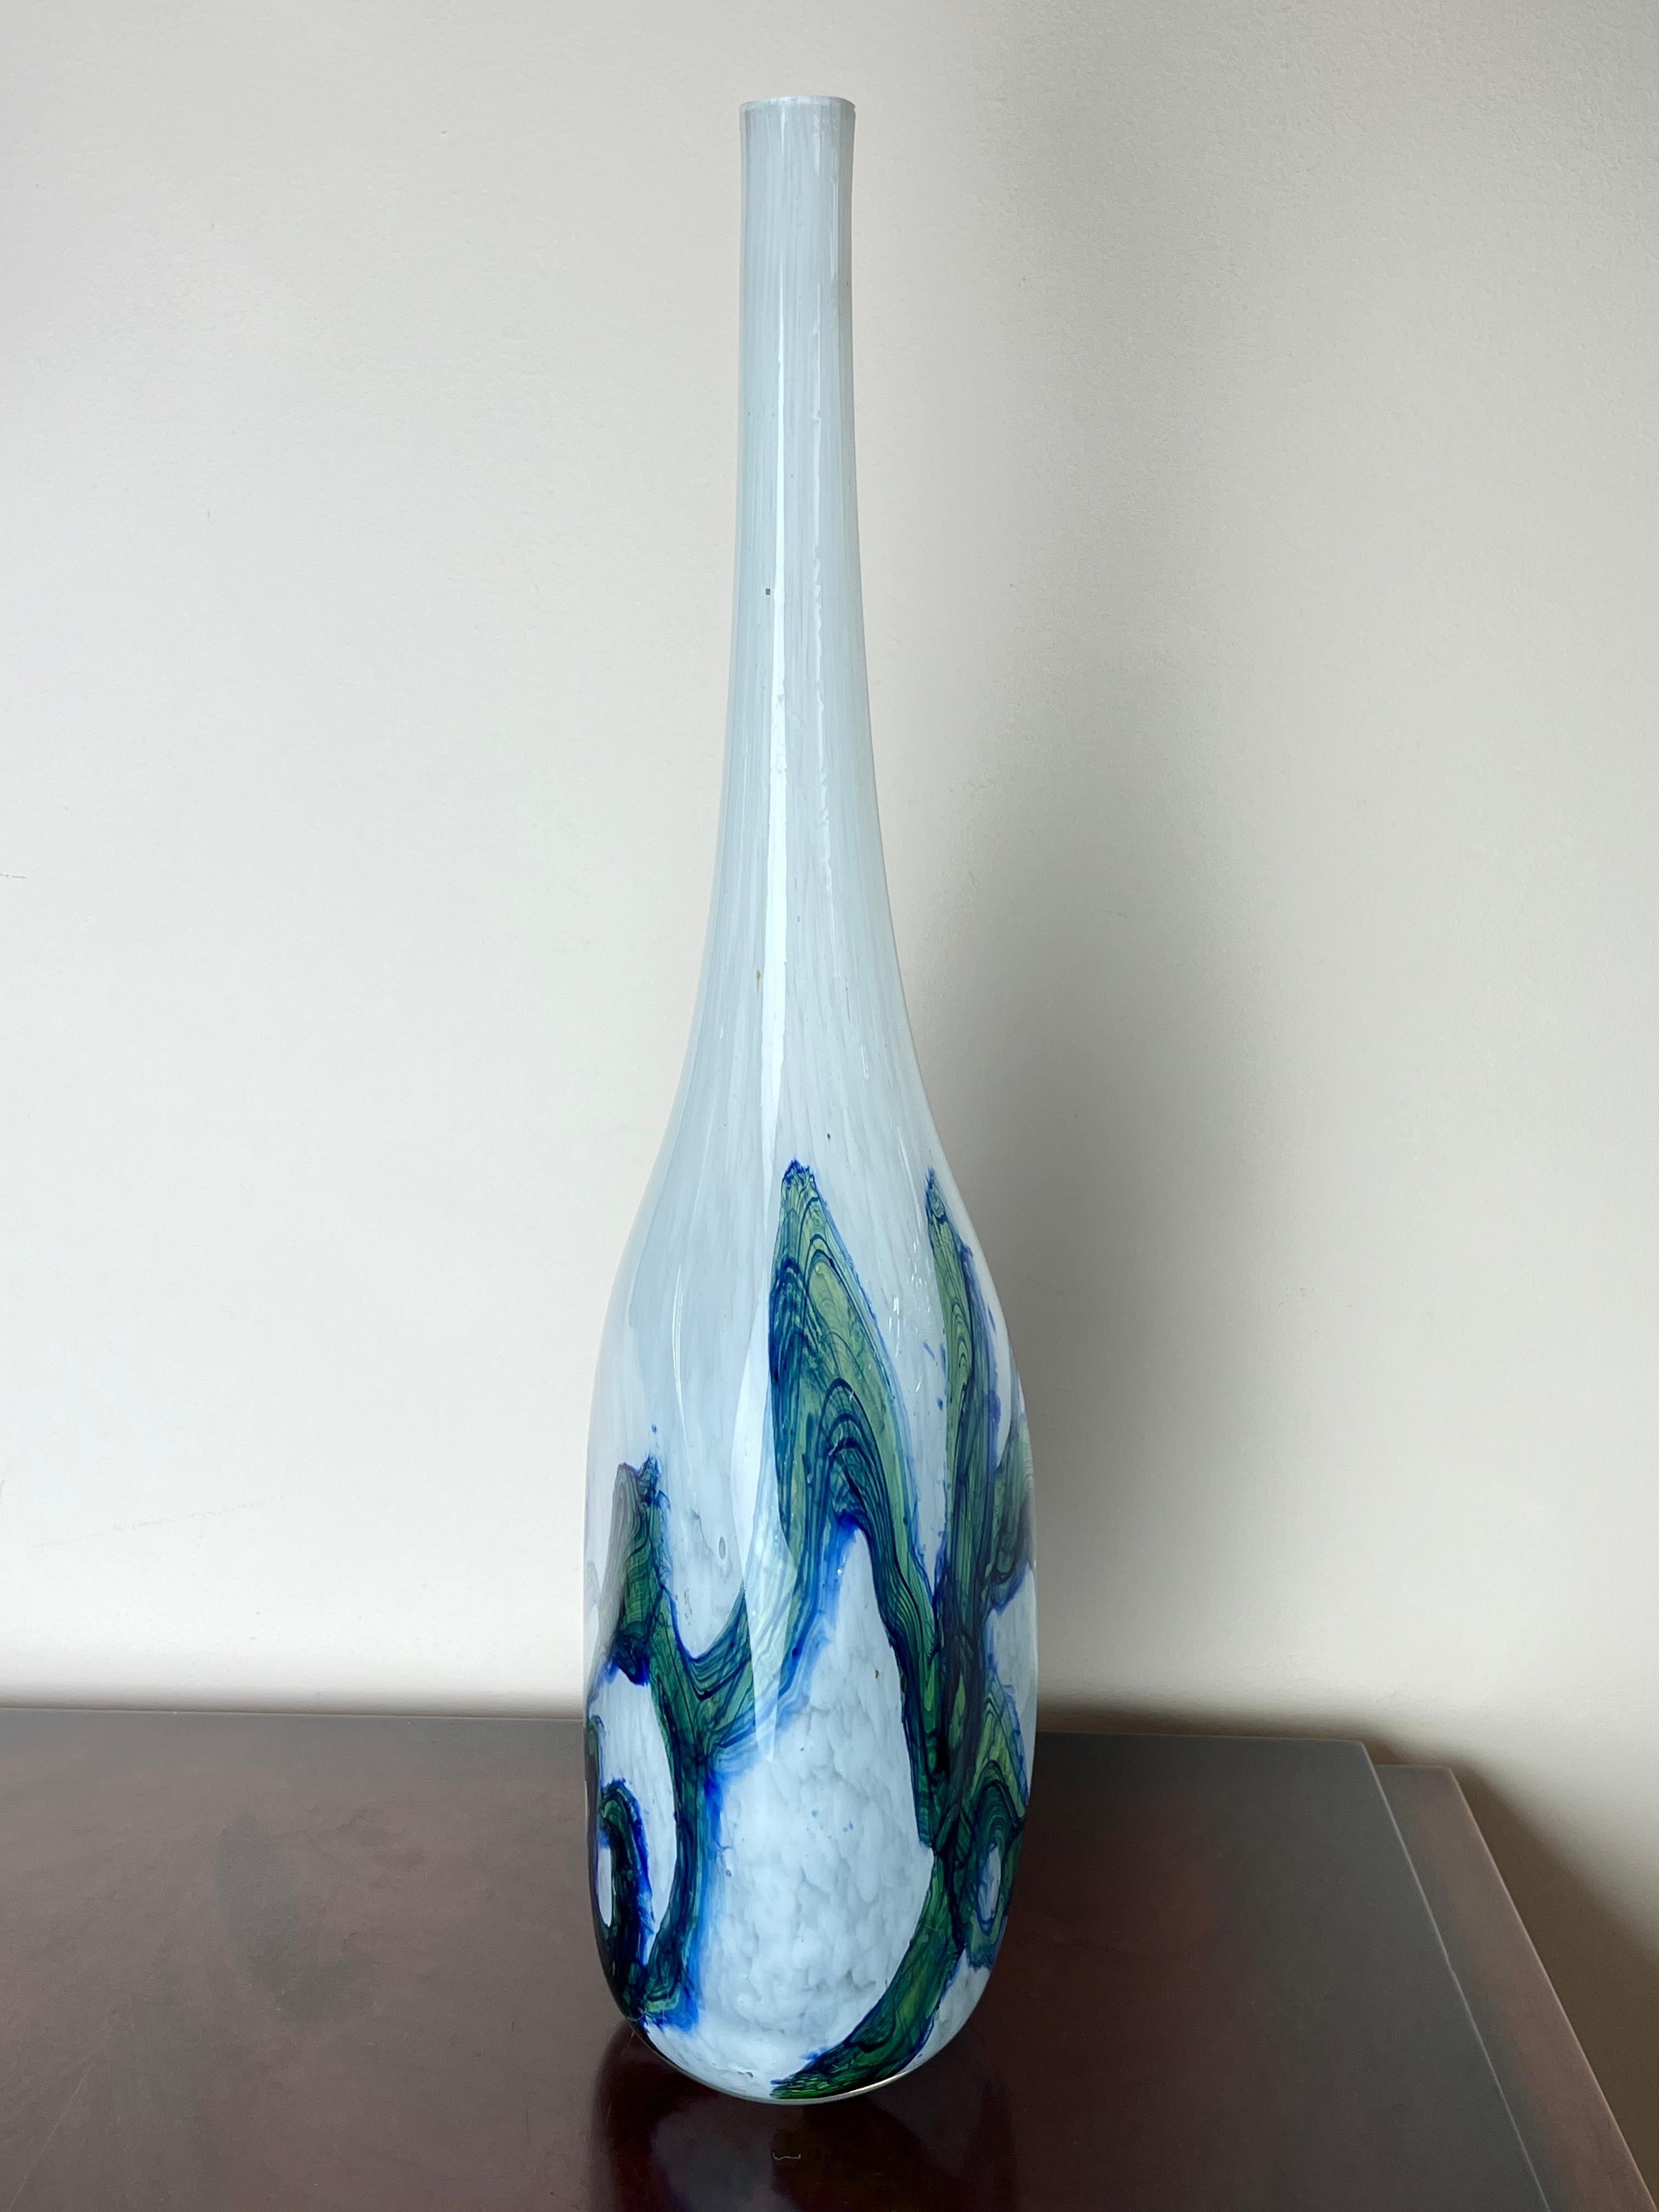 Mid-20th Century Stem Vase in Polychrome Murano Glass, Italy, 1960s For Sale